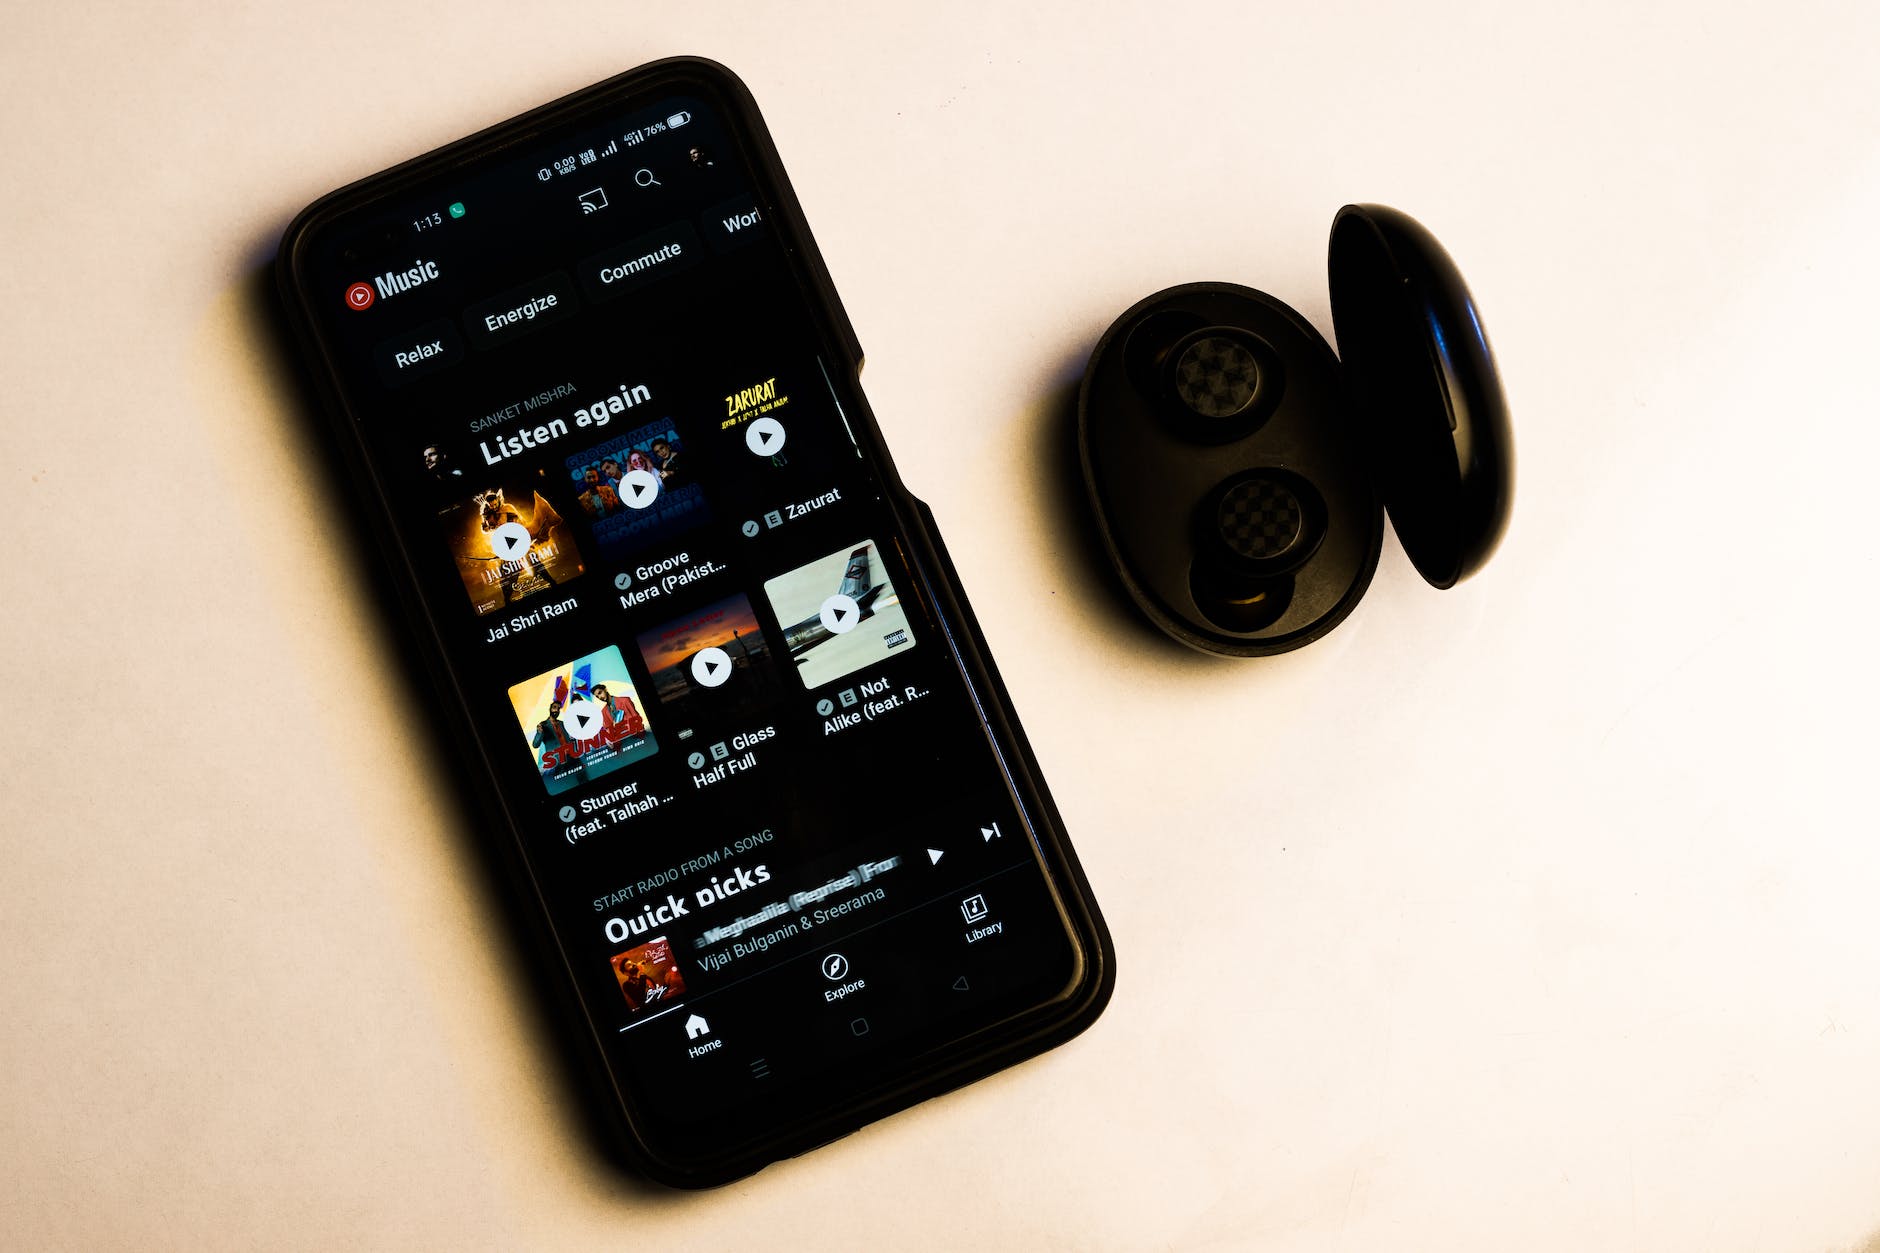 youtube music stream songs and music videos app on the display of smartphone or tablet